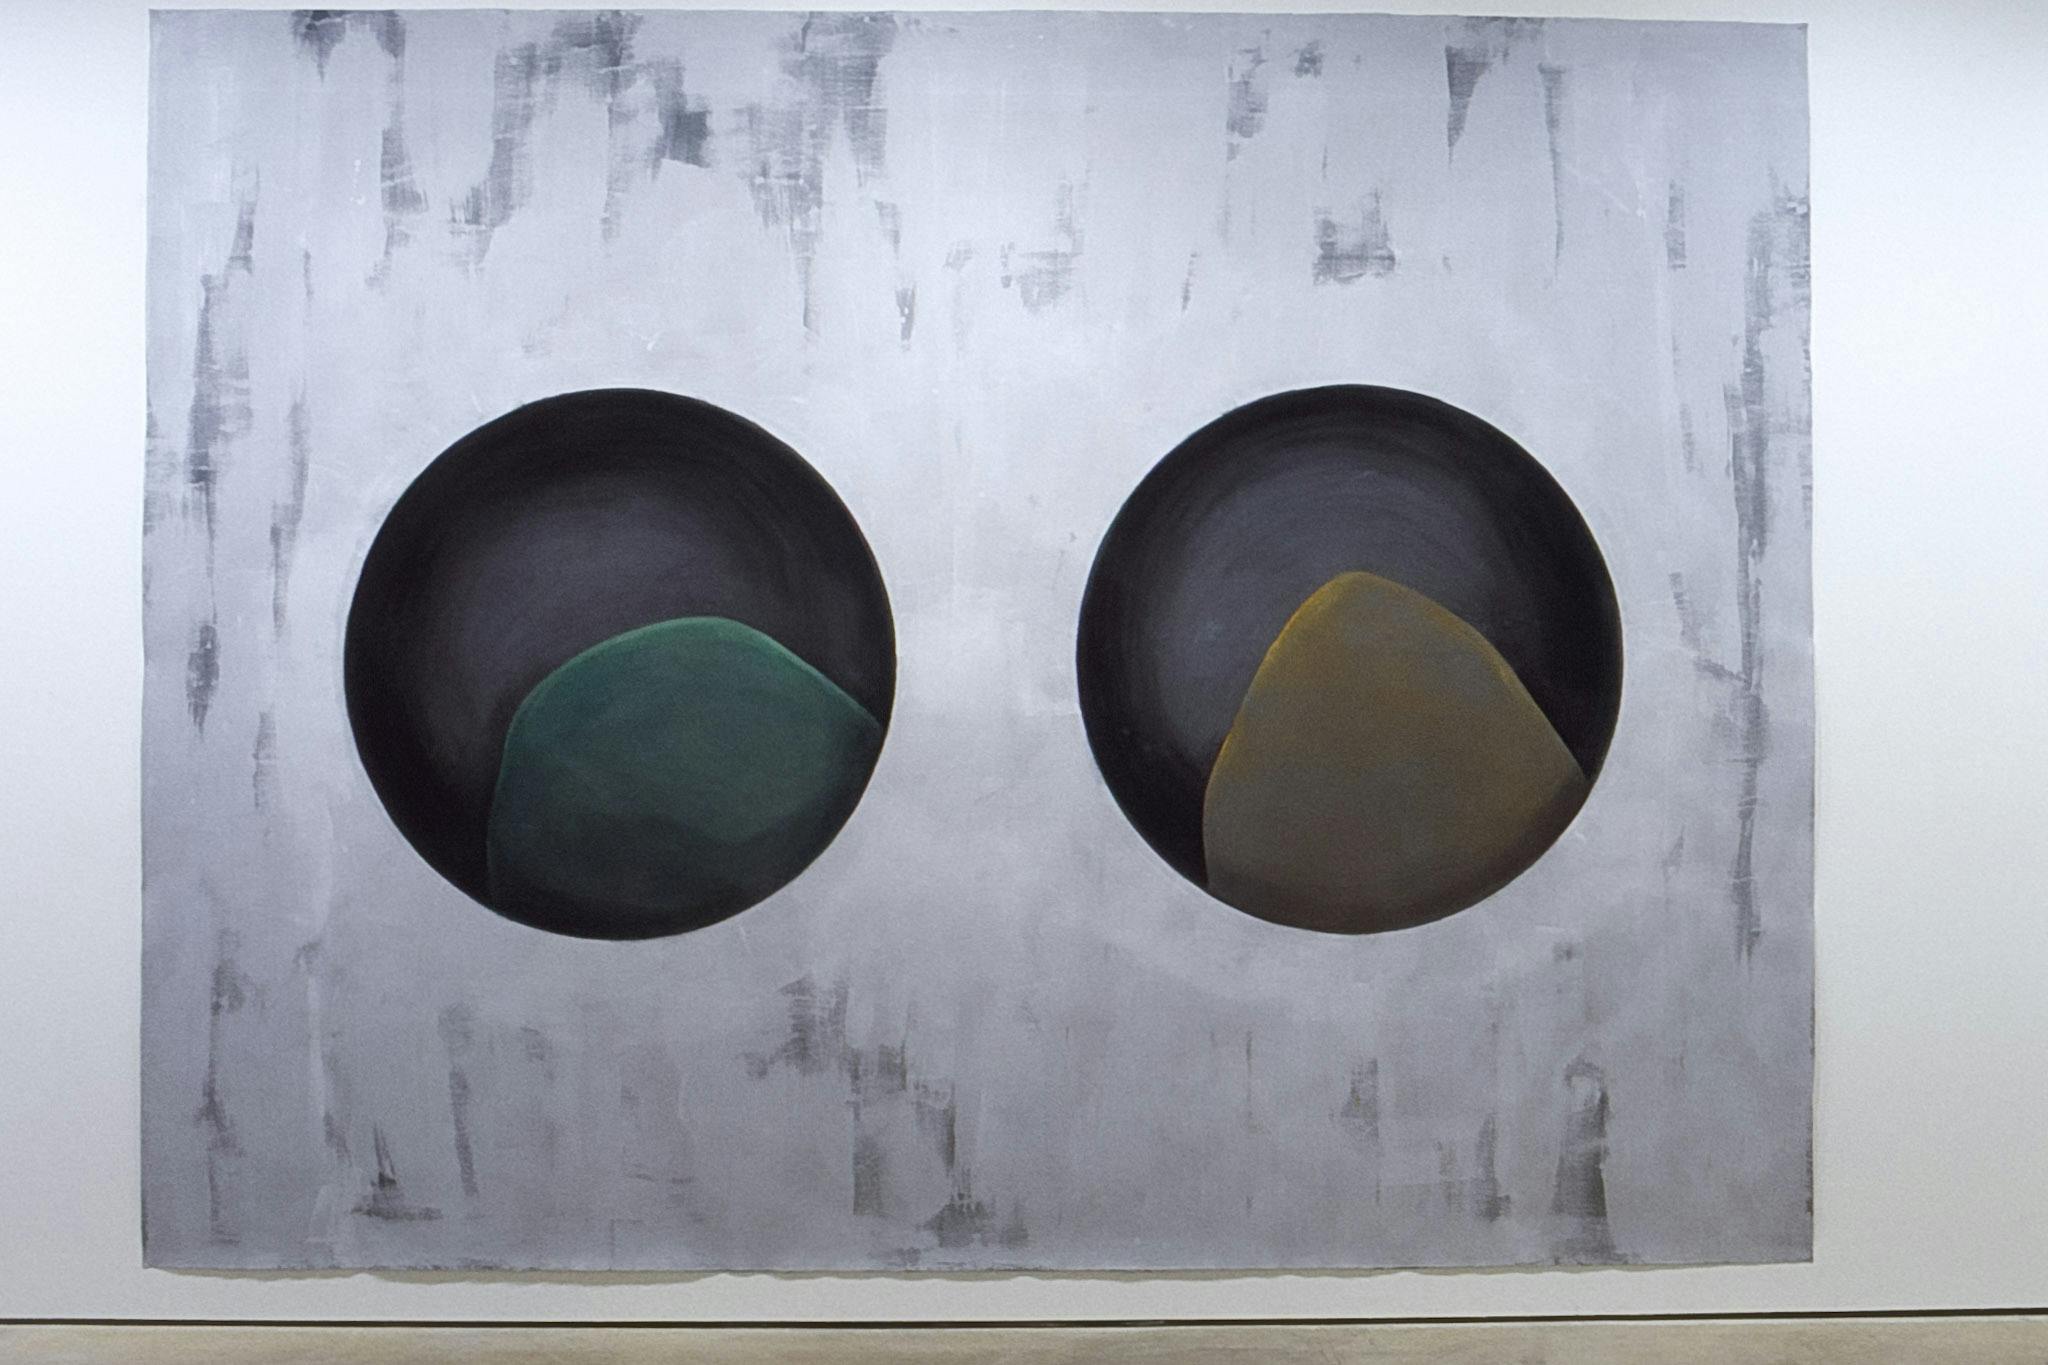 A large painting is installed on a gallery wall. Two black circles in the middle, which have organic shapes inside, are depicted in the light-gray background resembling a surface of a marble slab. 